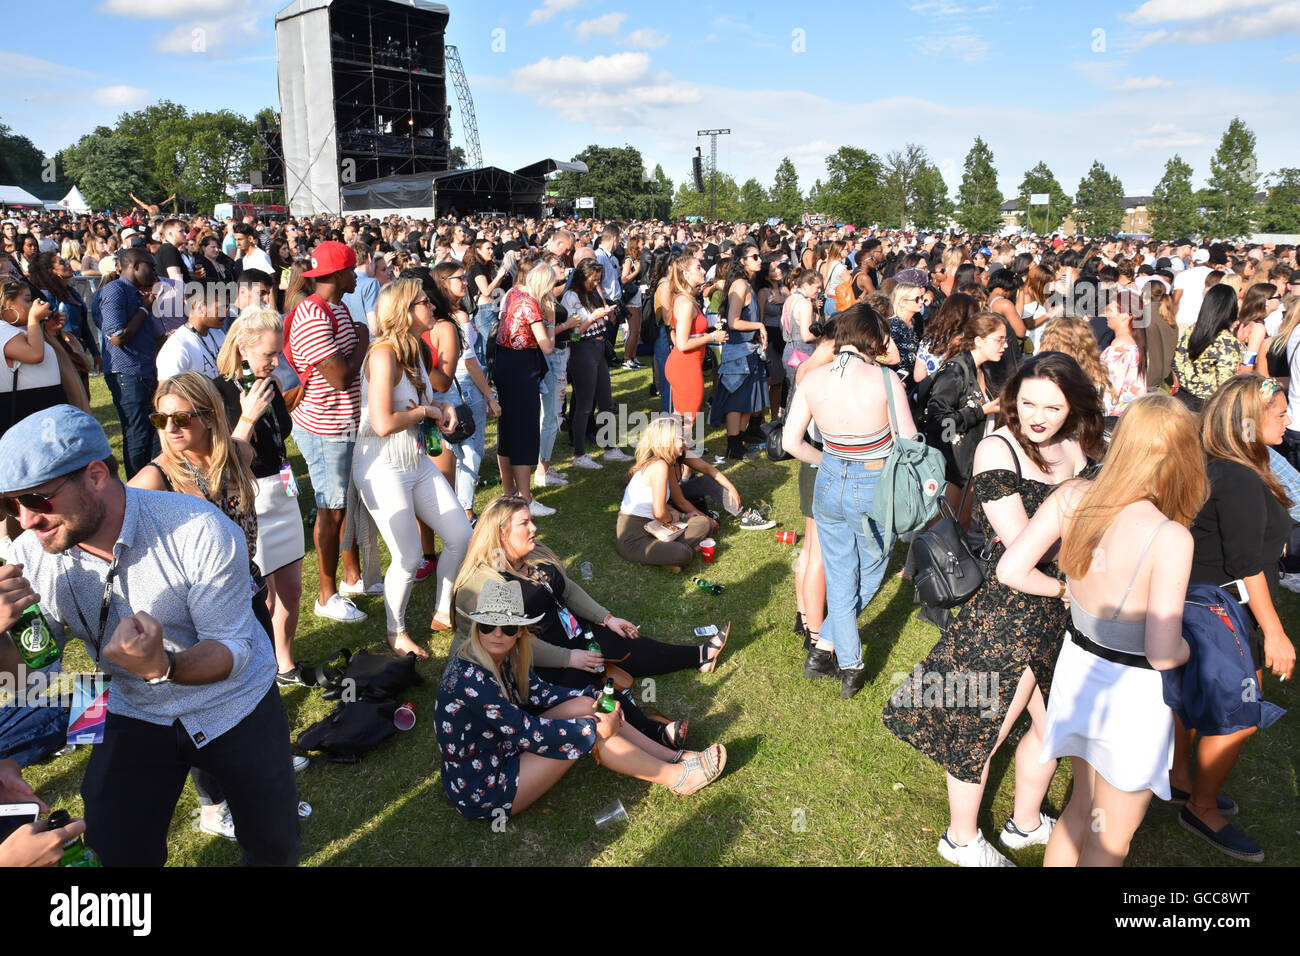 Finsbury Park, London, UK. 8th July 2016. The crowd at the Wireless Festival.  Credit: Matthew Chattle/Alamy Live News Stock Photo - Alamy